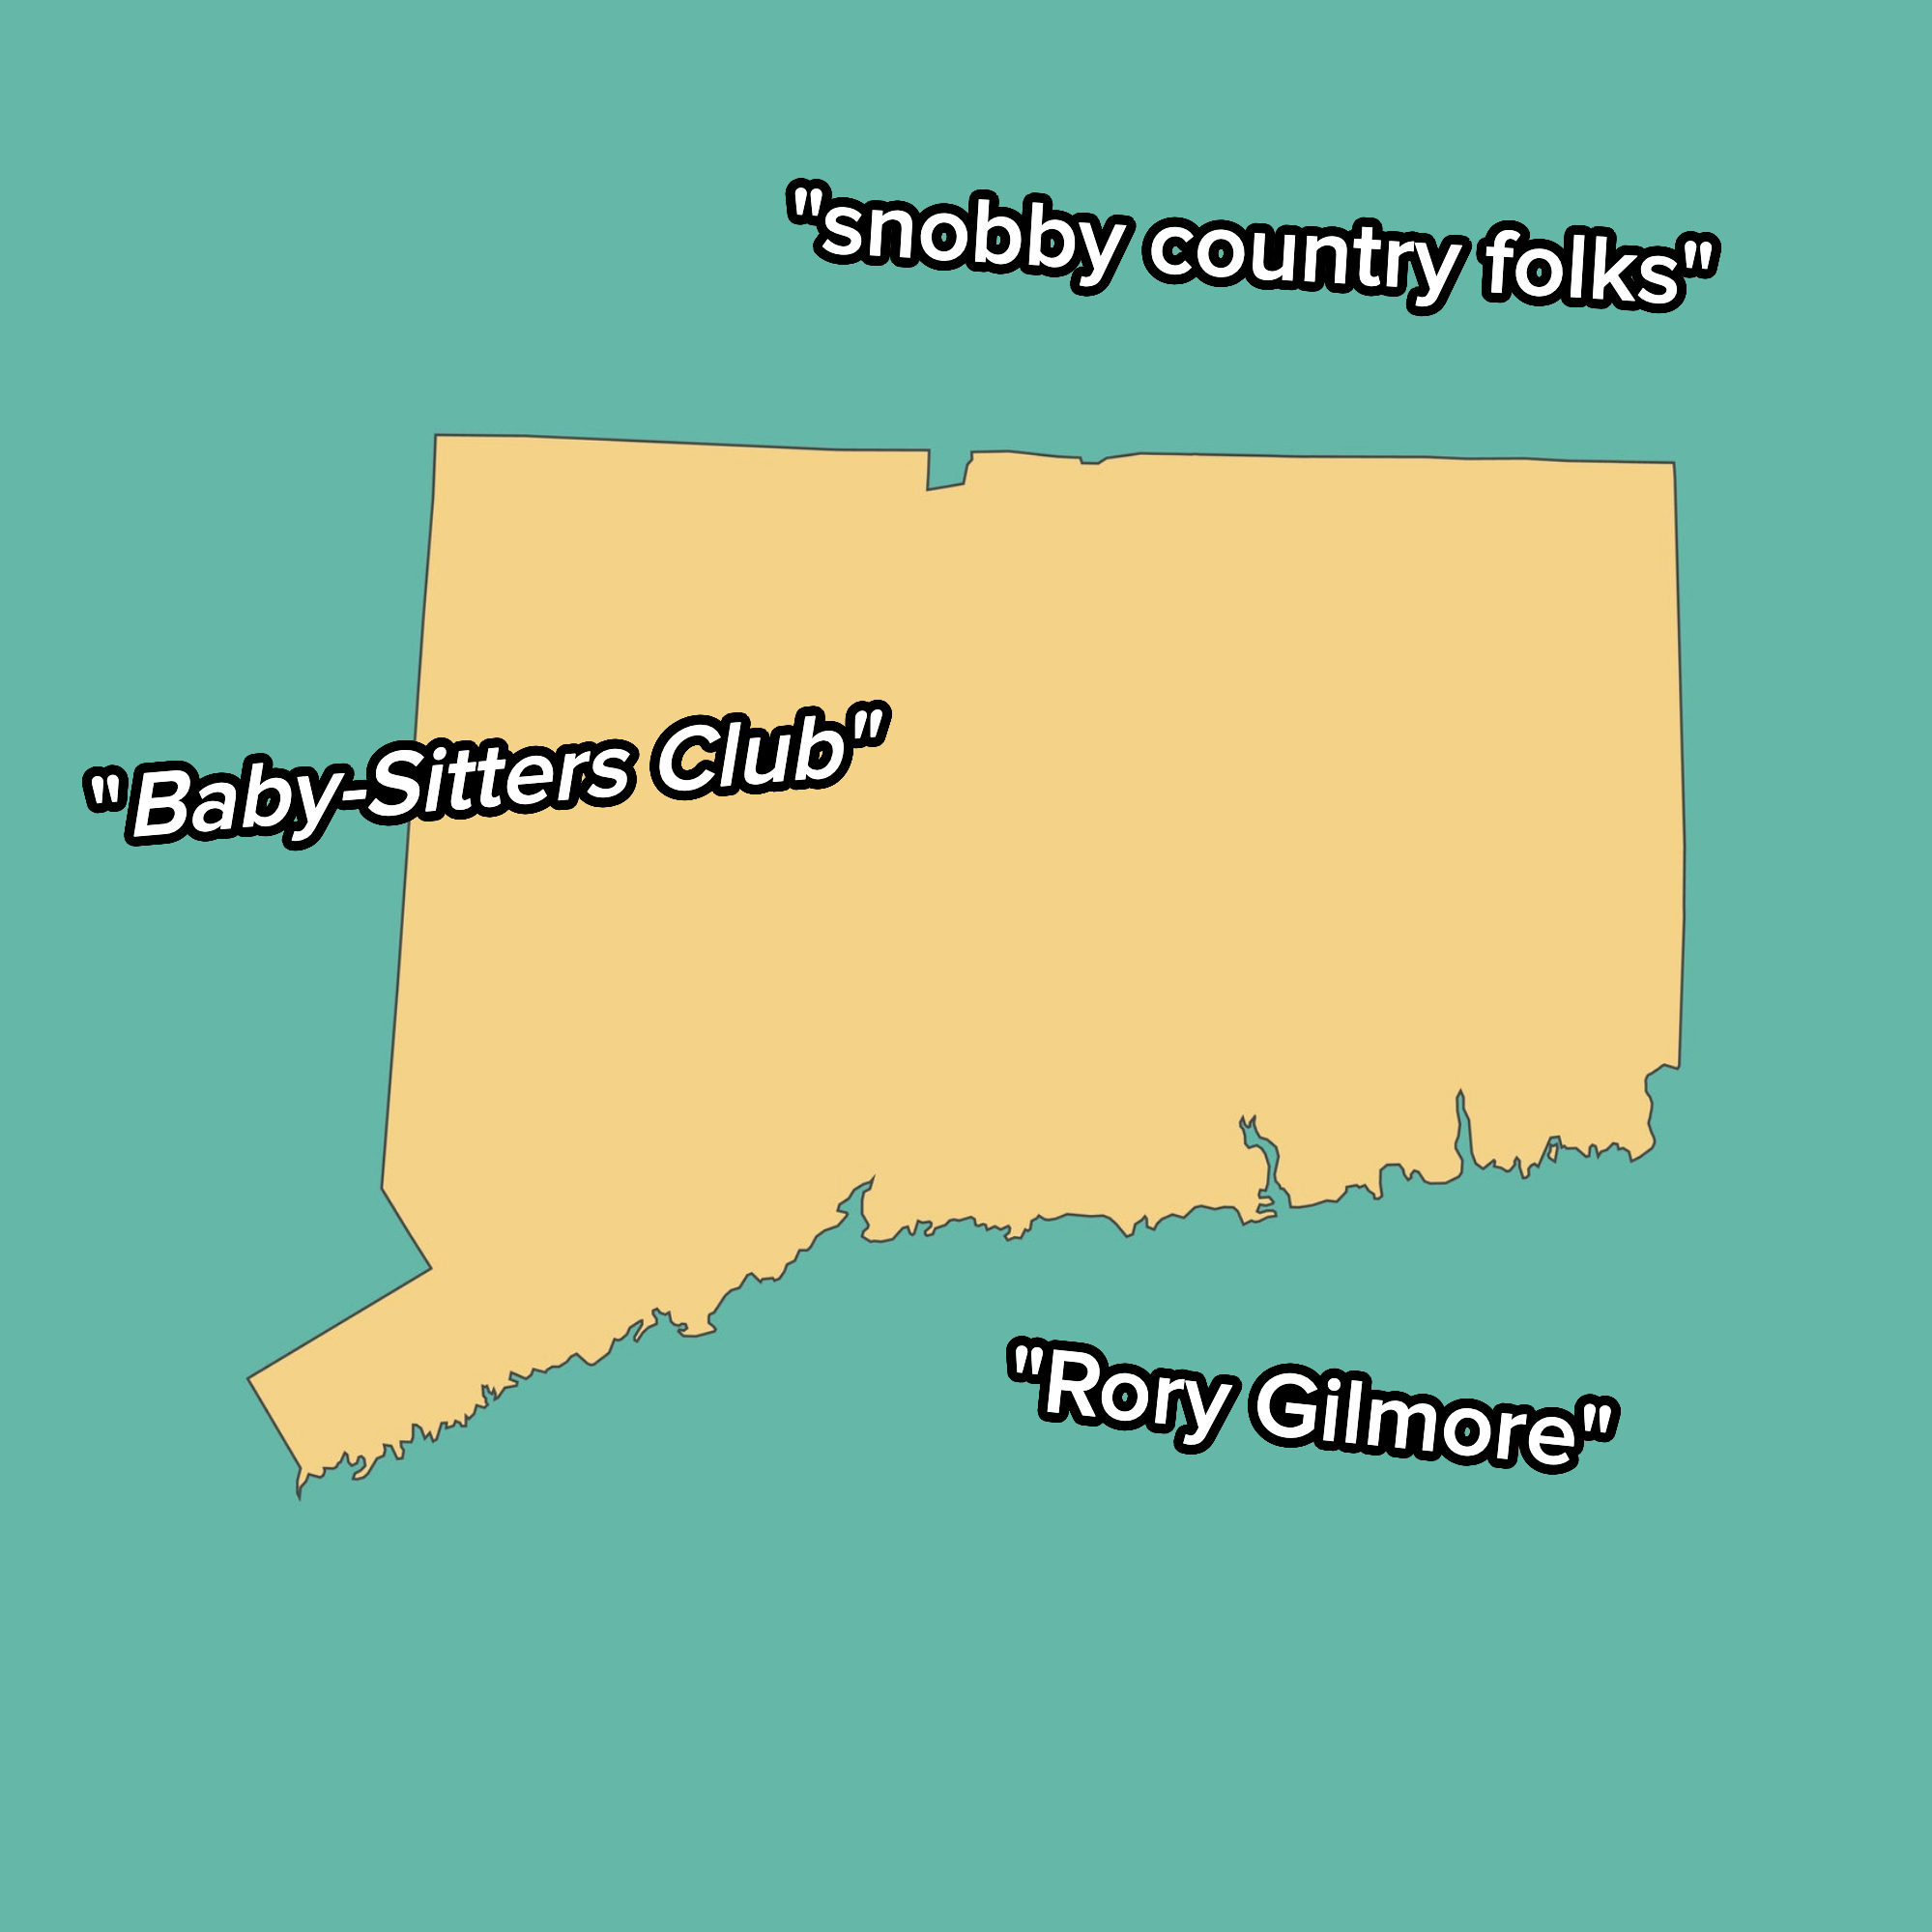 Outline of Connecticut